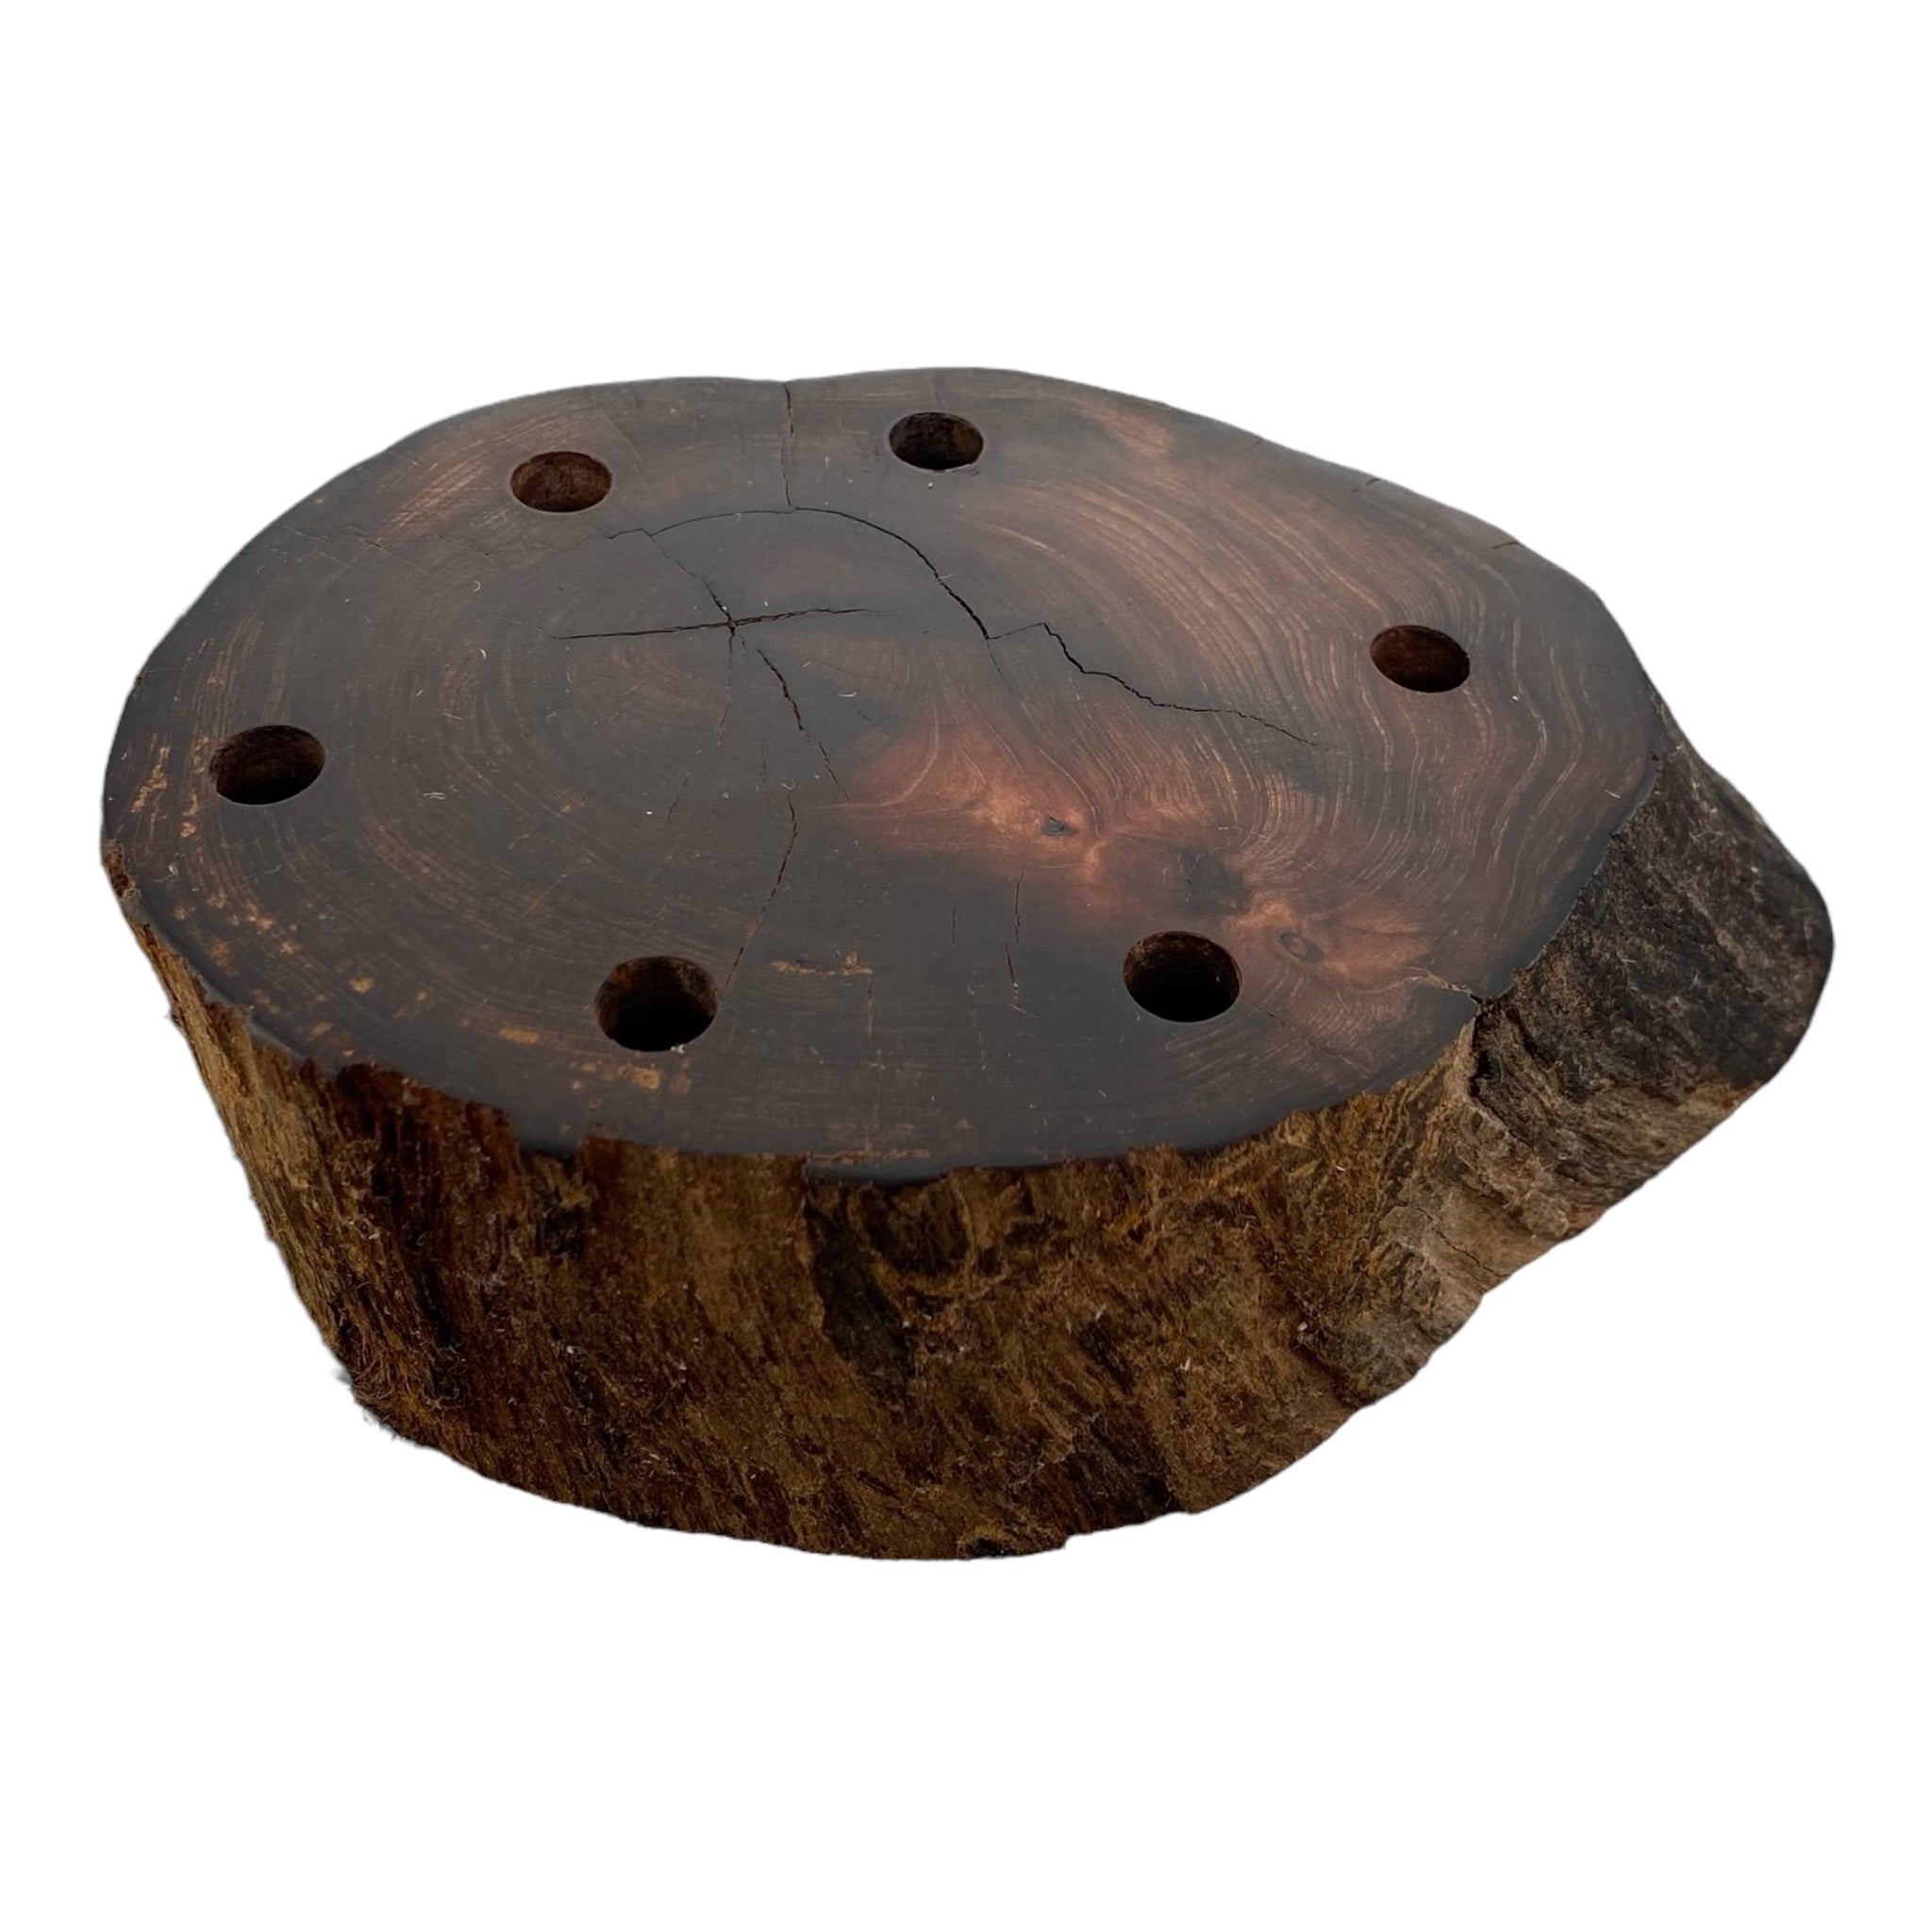 6 Hole Wood Display Stand Holder For 10mm Bong Bowl Pieces Or Quartz Bangers - Redwood Driftwood With Live Edge